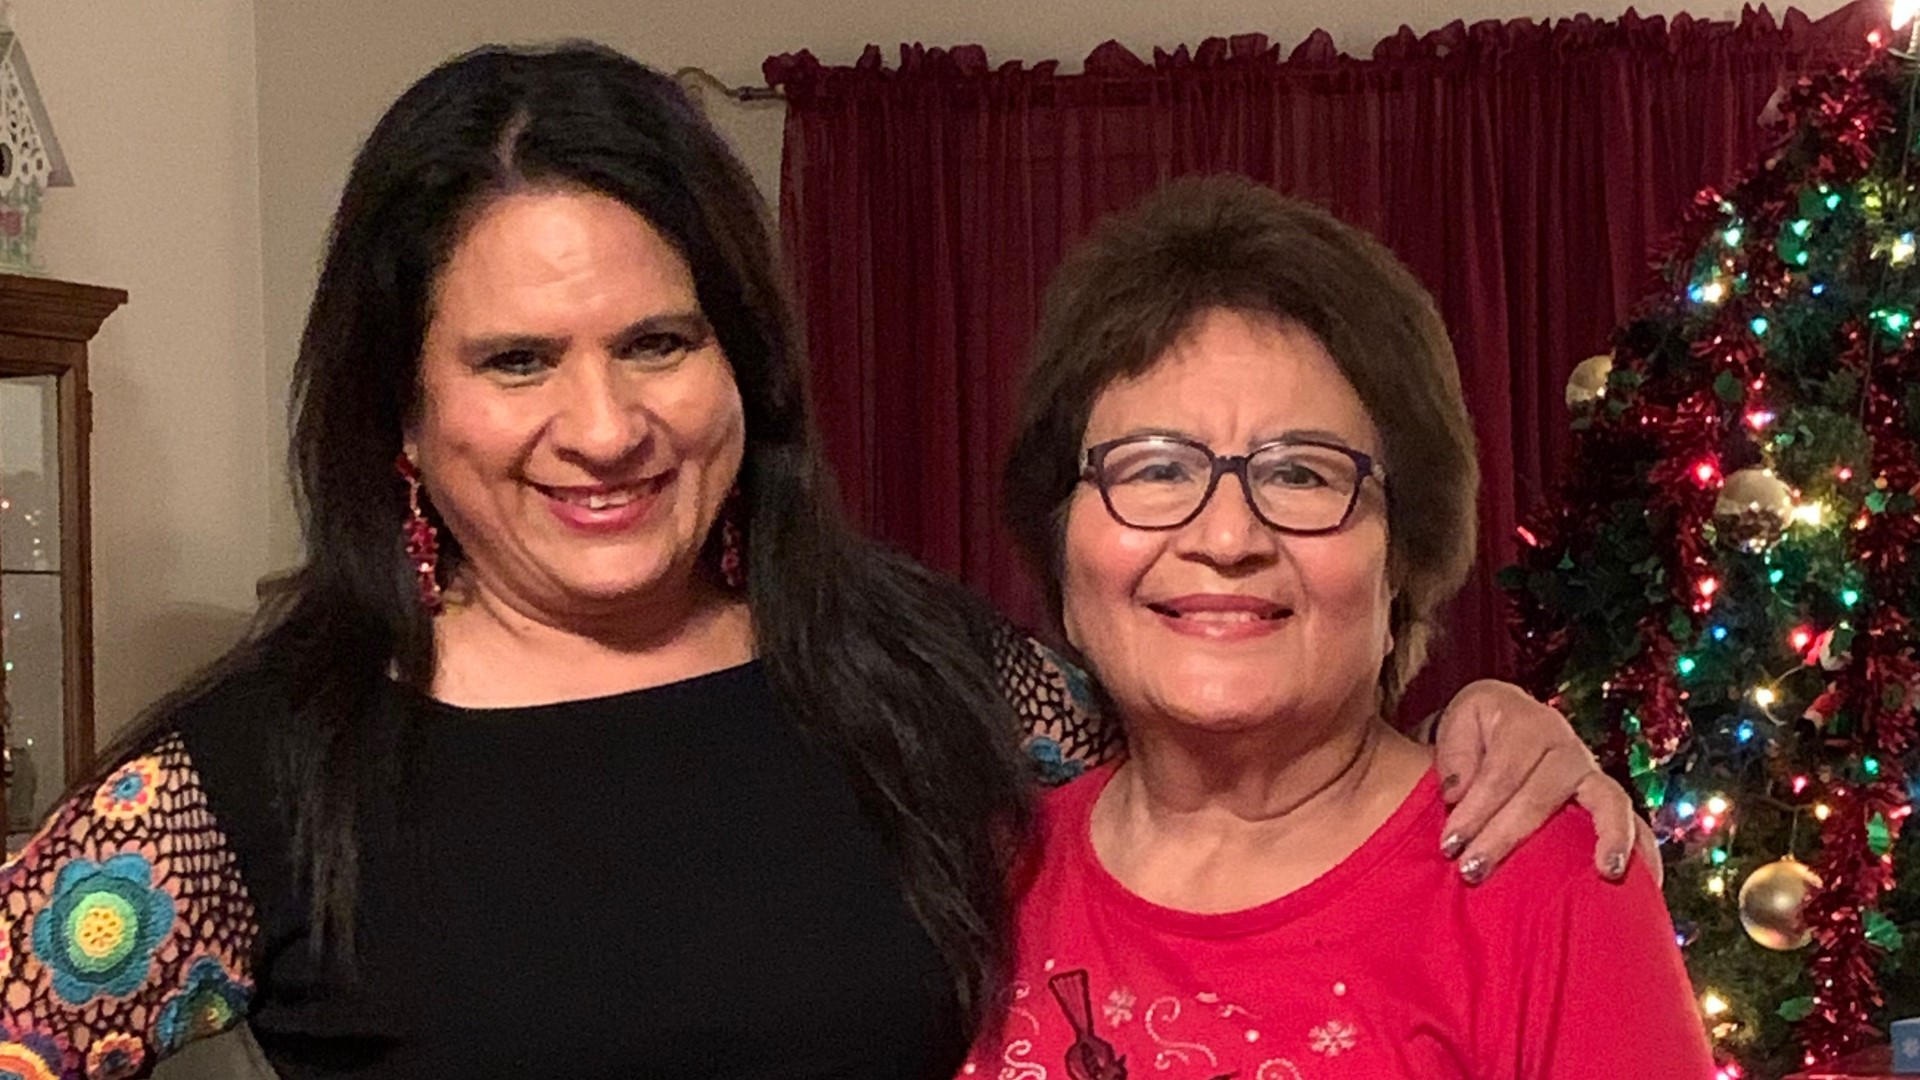 “In a million years, I never expected my mother who is a two-time breast cancer survivor and has overcome so much to die of COVID,” said WFAA’s Rebecca Lopez.